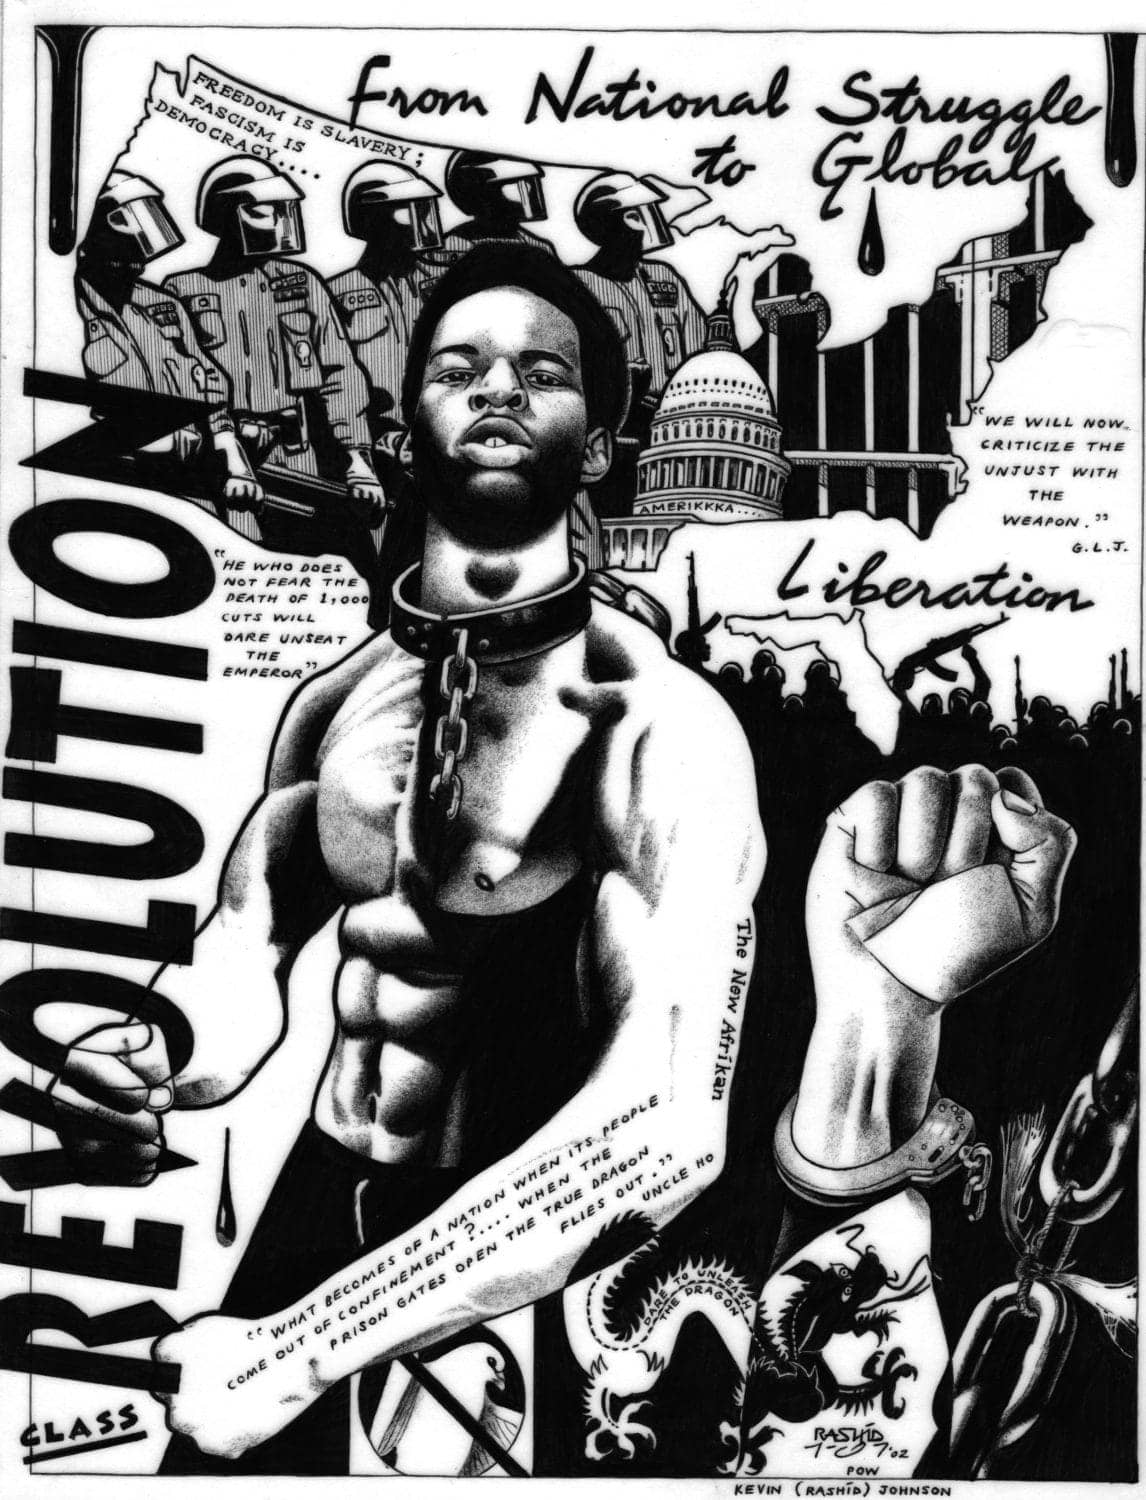 Revolution-art-by-Rashid-2002, How the pigs abuse ‘gang’ labels, Abolition Now! 